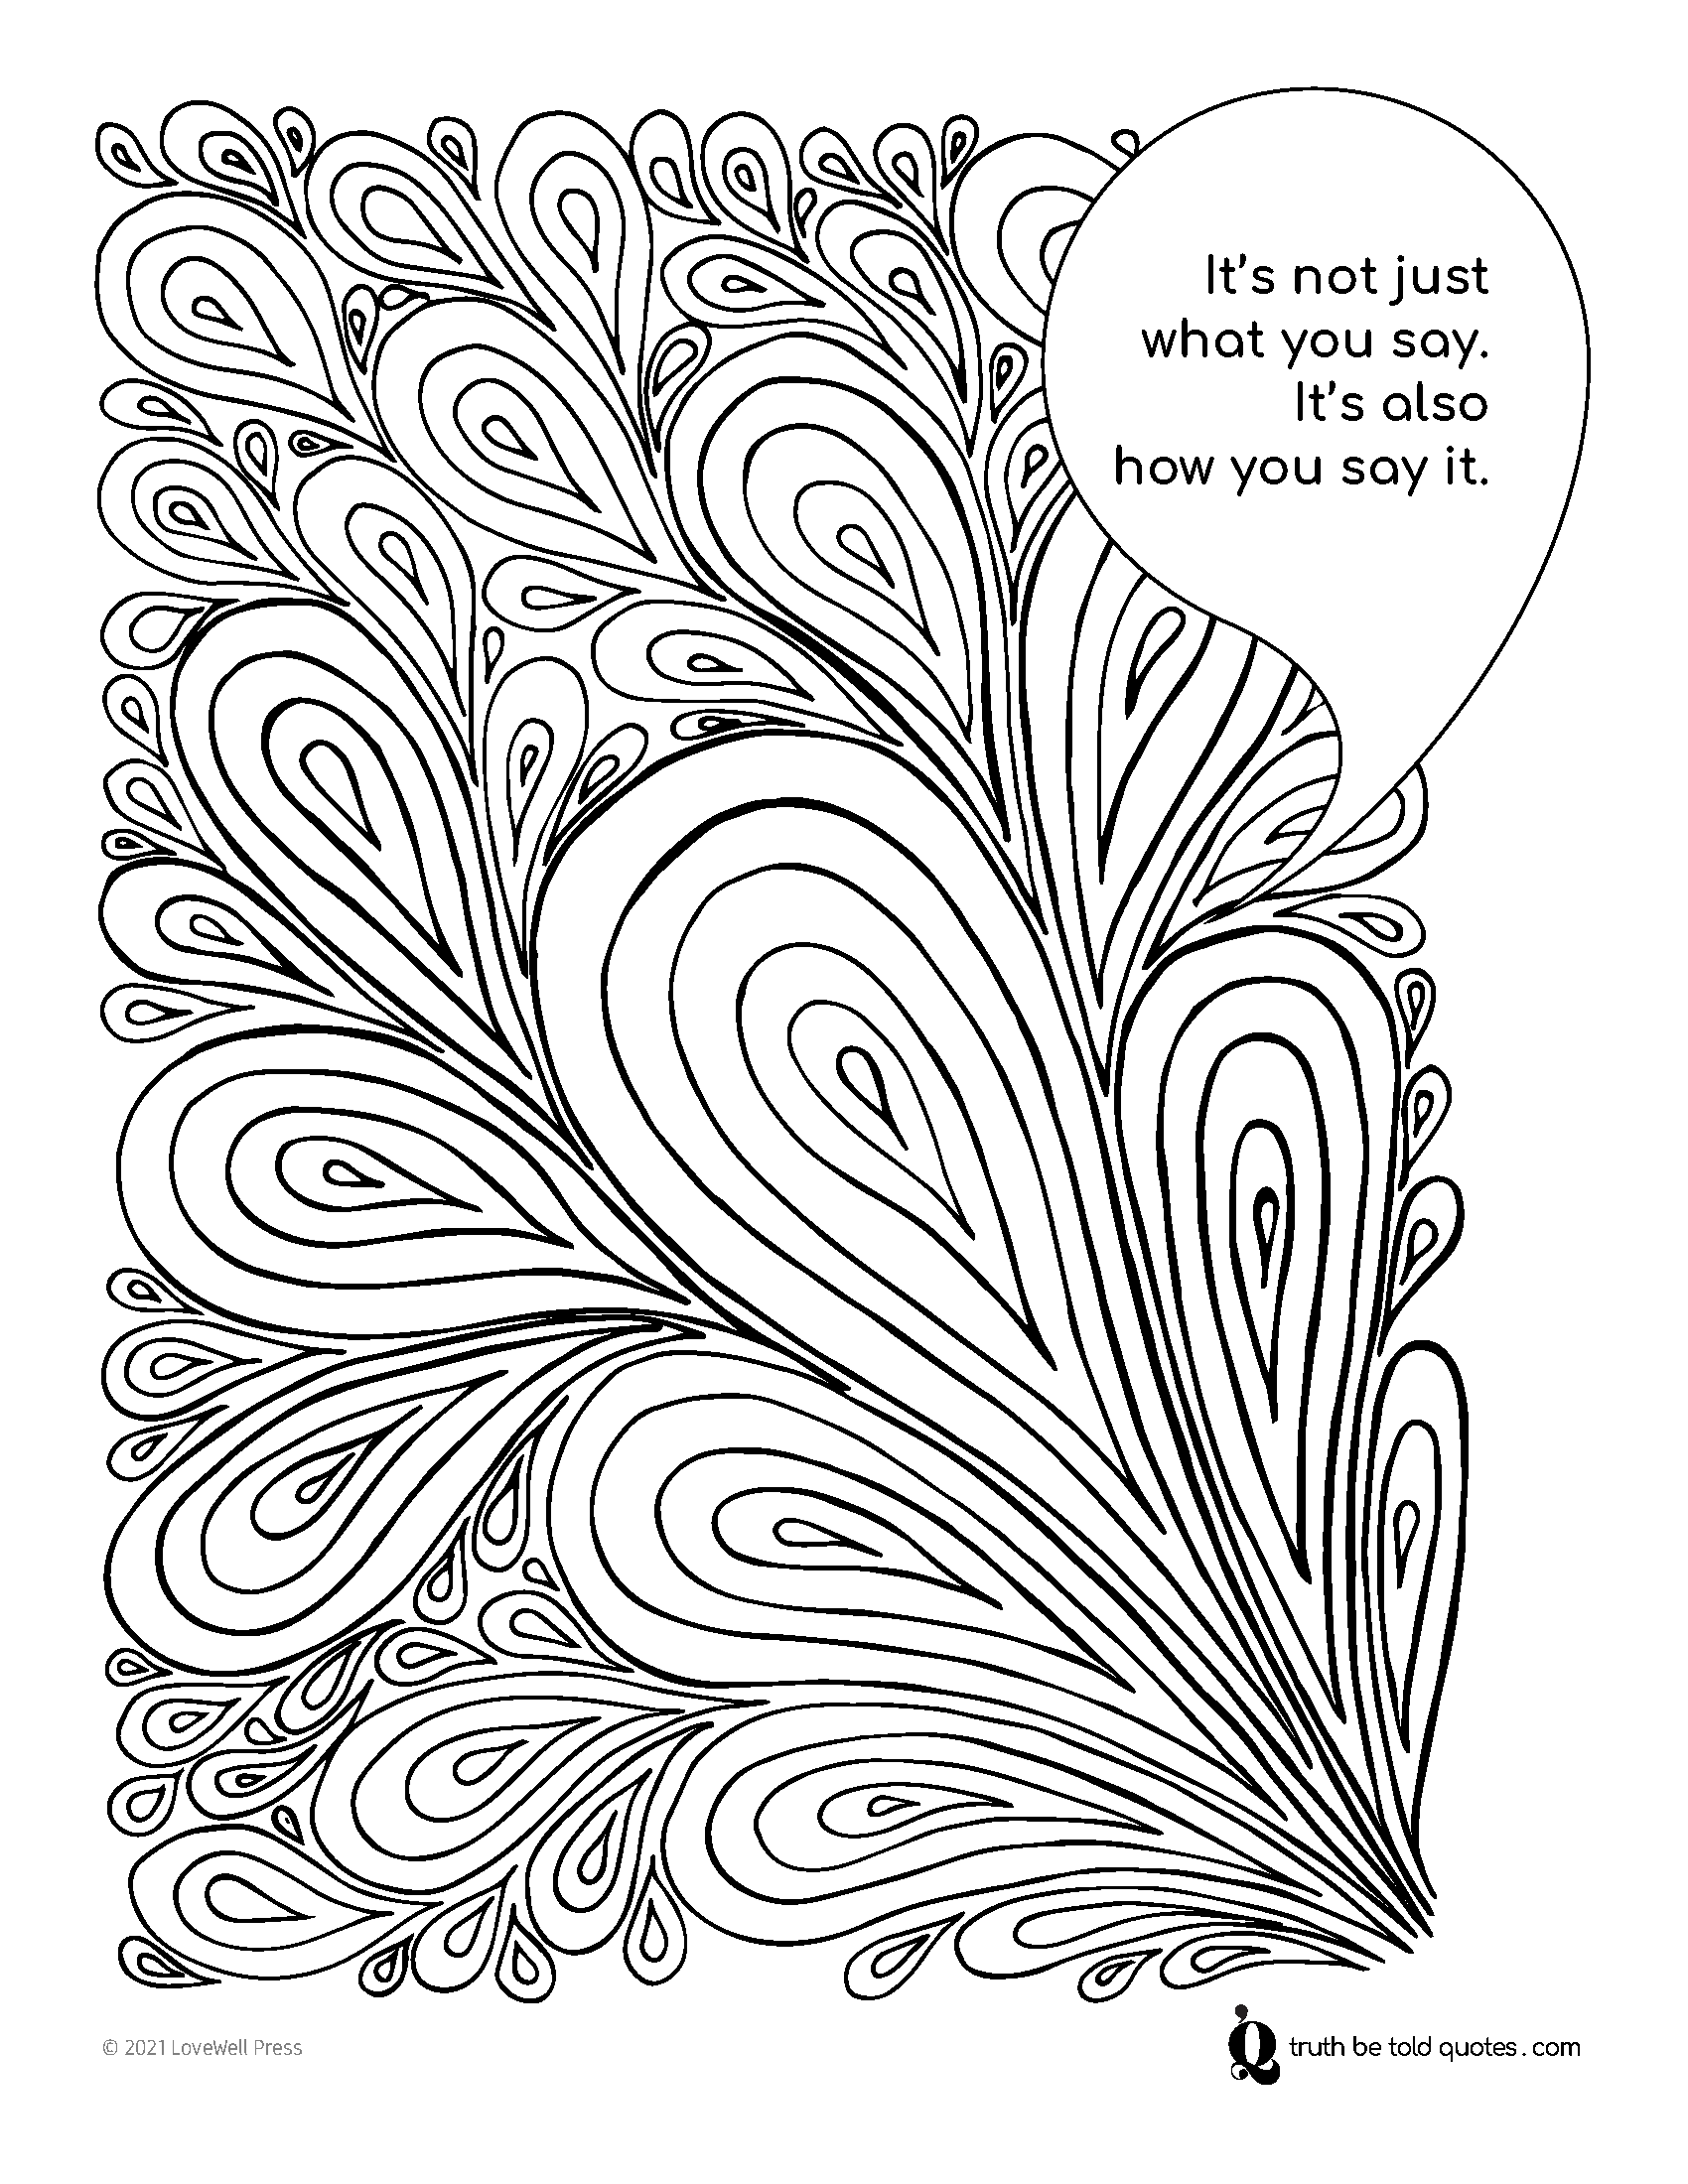 Free mindfulness coloring page with quote about speaking with kindess with imagery of zentangle style droplets